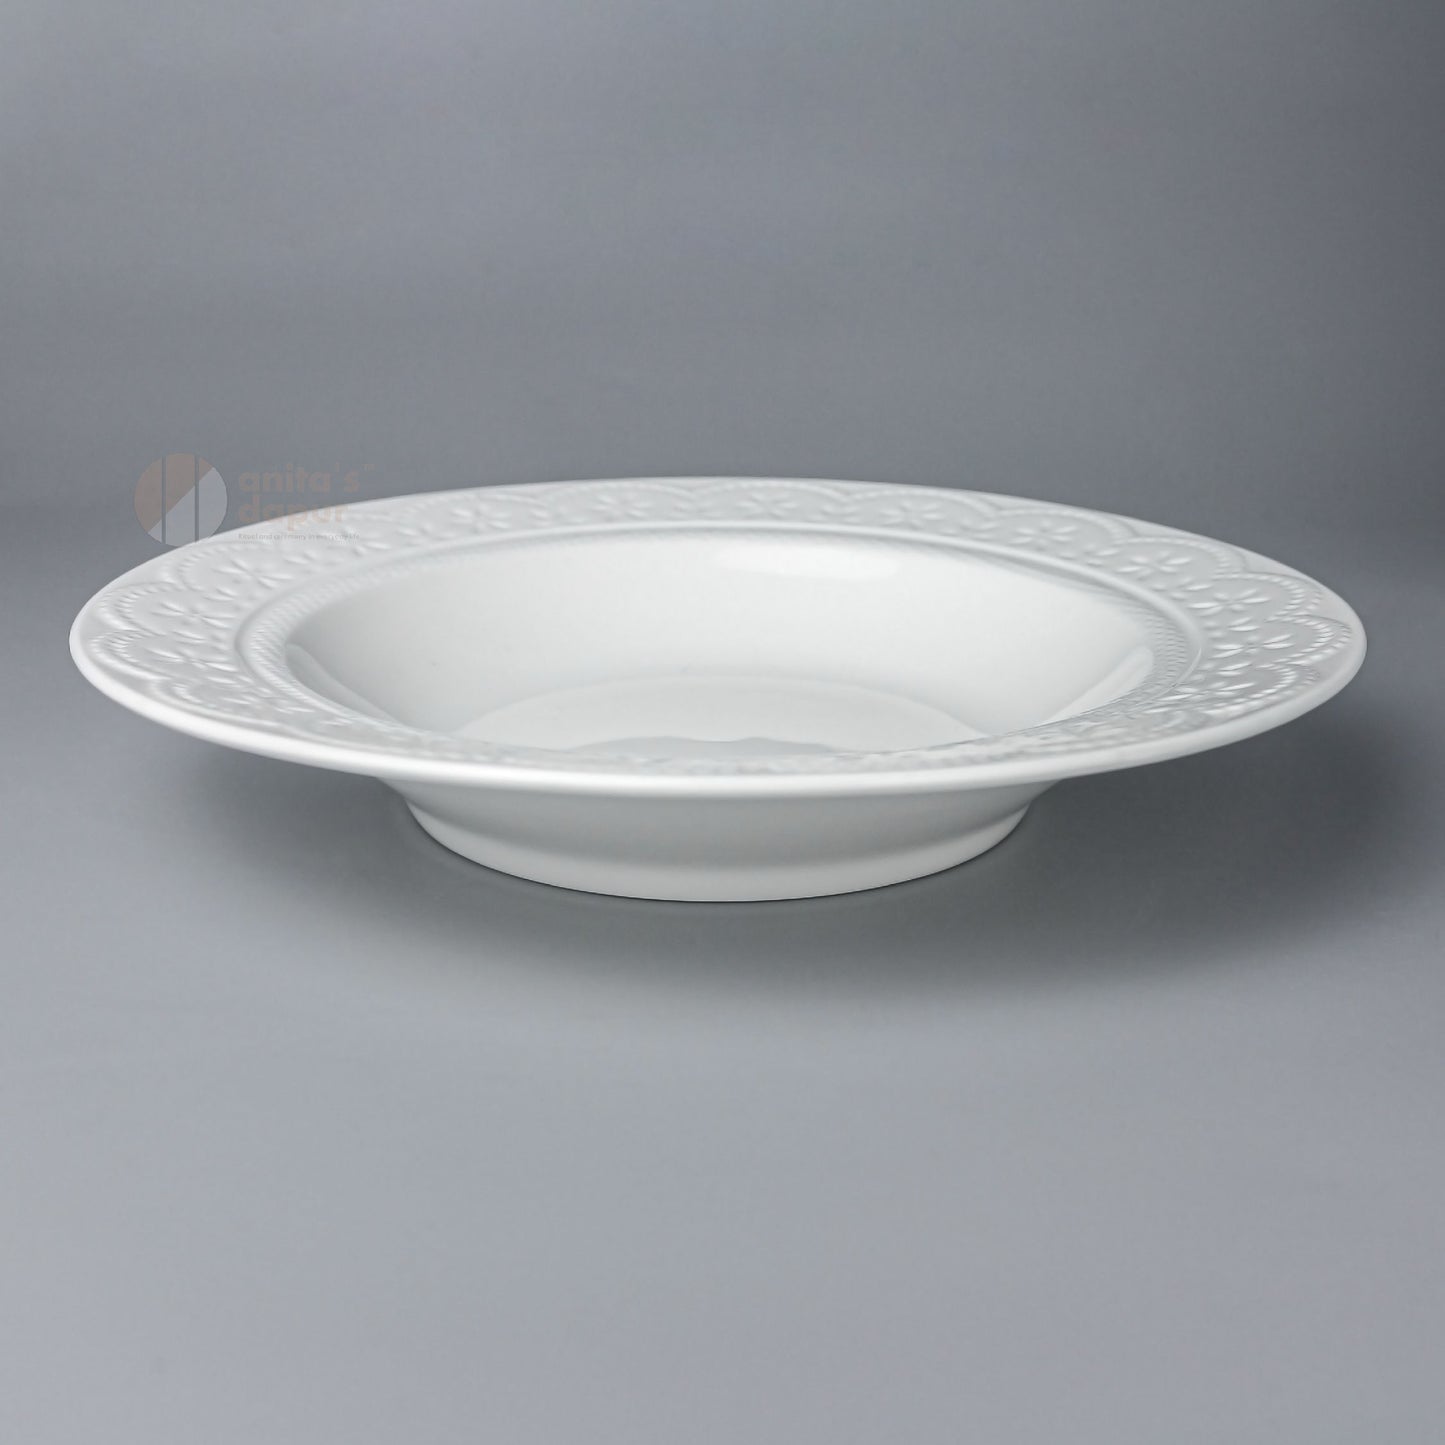 White Lace Deep Plate (9 inch)